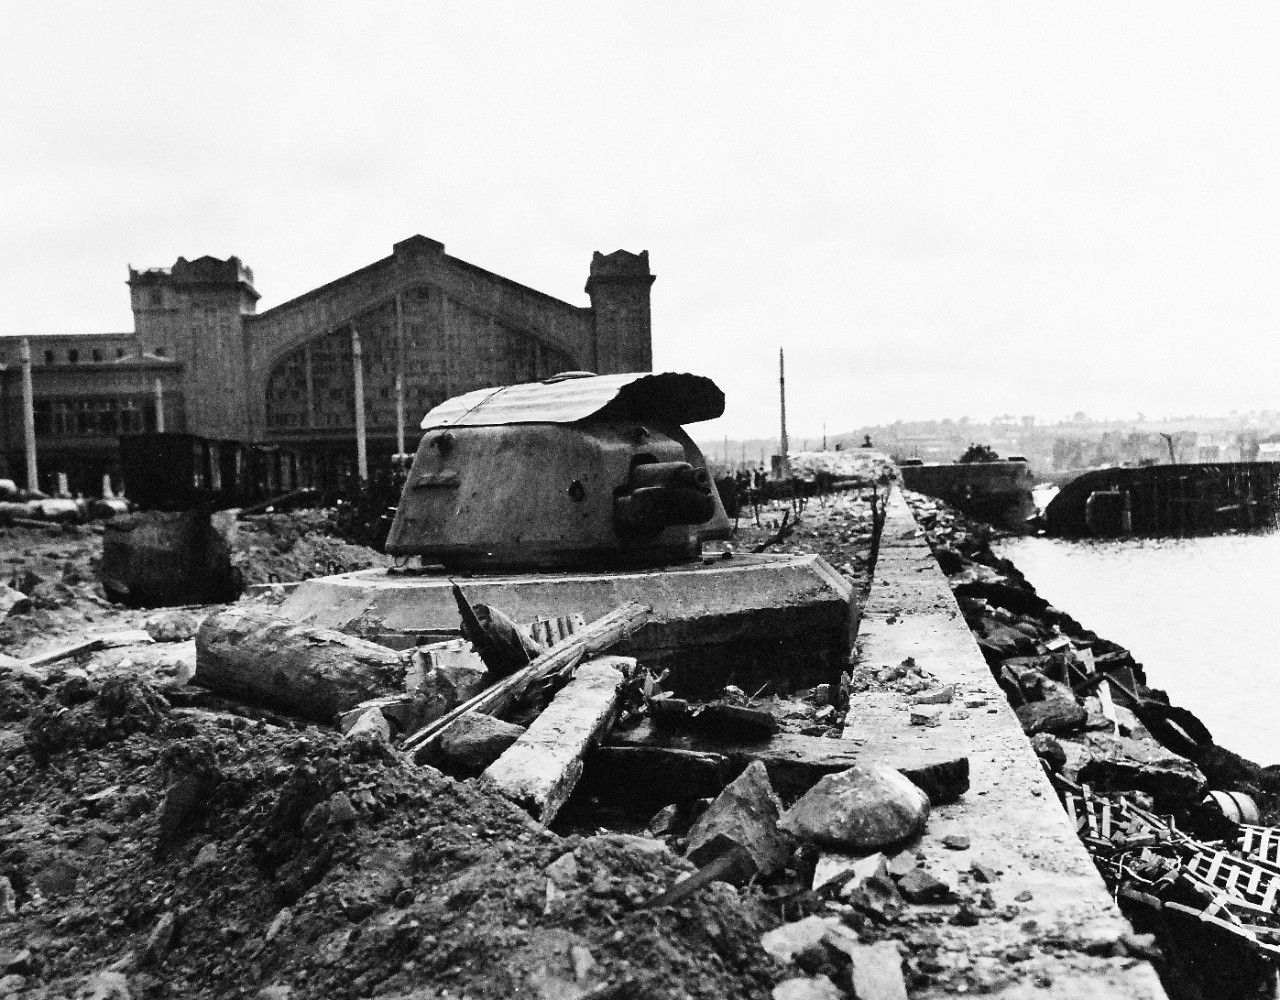 80-G-255934:  Normandy Invasion, Cherbourg, France, July 1944.    French ship SS Mormano lies on her side off Place de Napoleon, Cherbourg, France.  The water front covered with debris shows the severity of the Allied bombardment.   Photographed by CPU-11, 4 July 1944.  Official U.S. Navy Photograph, now in the collections of the National Archives.   (2014/11/05). 